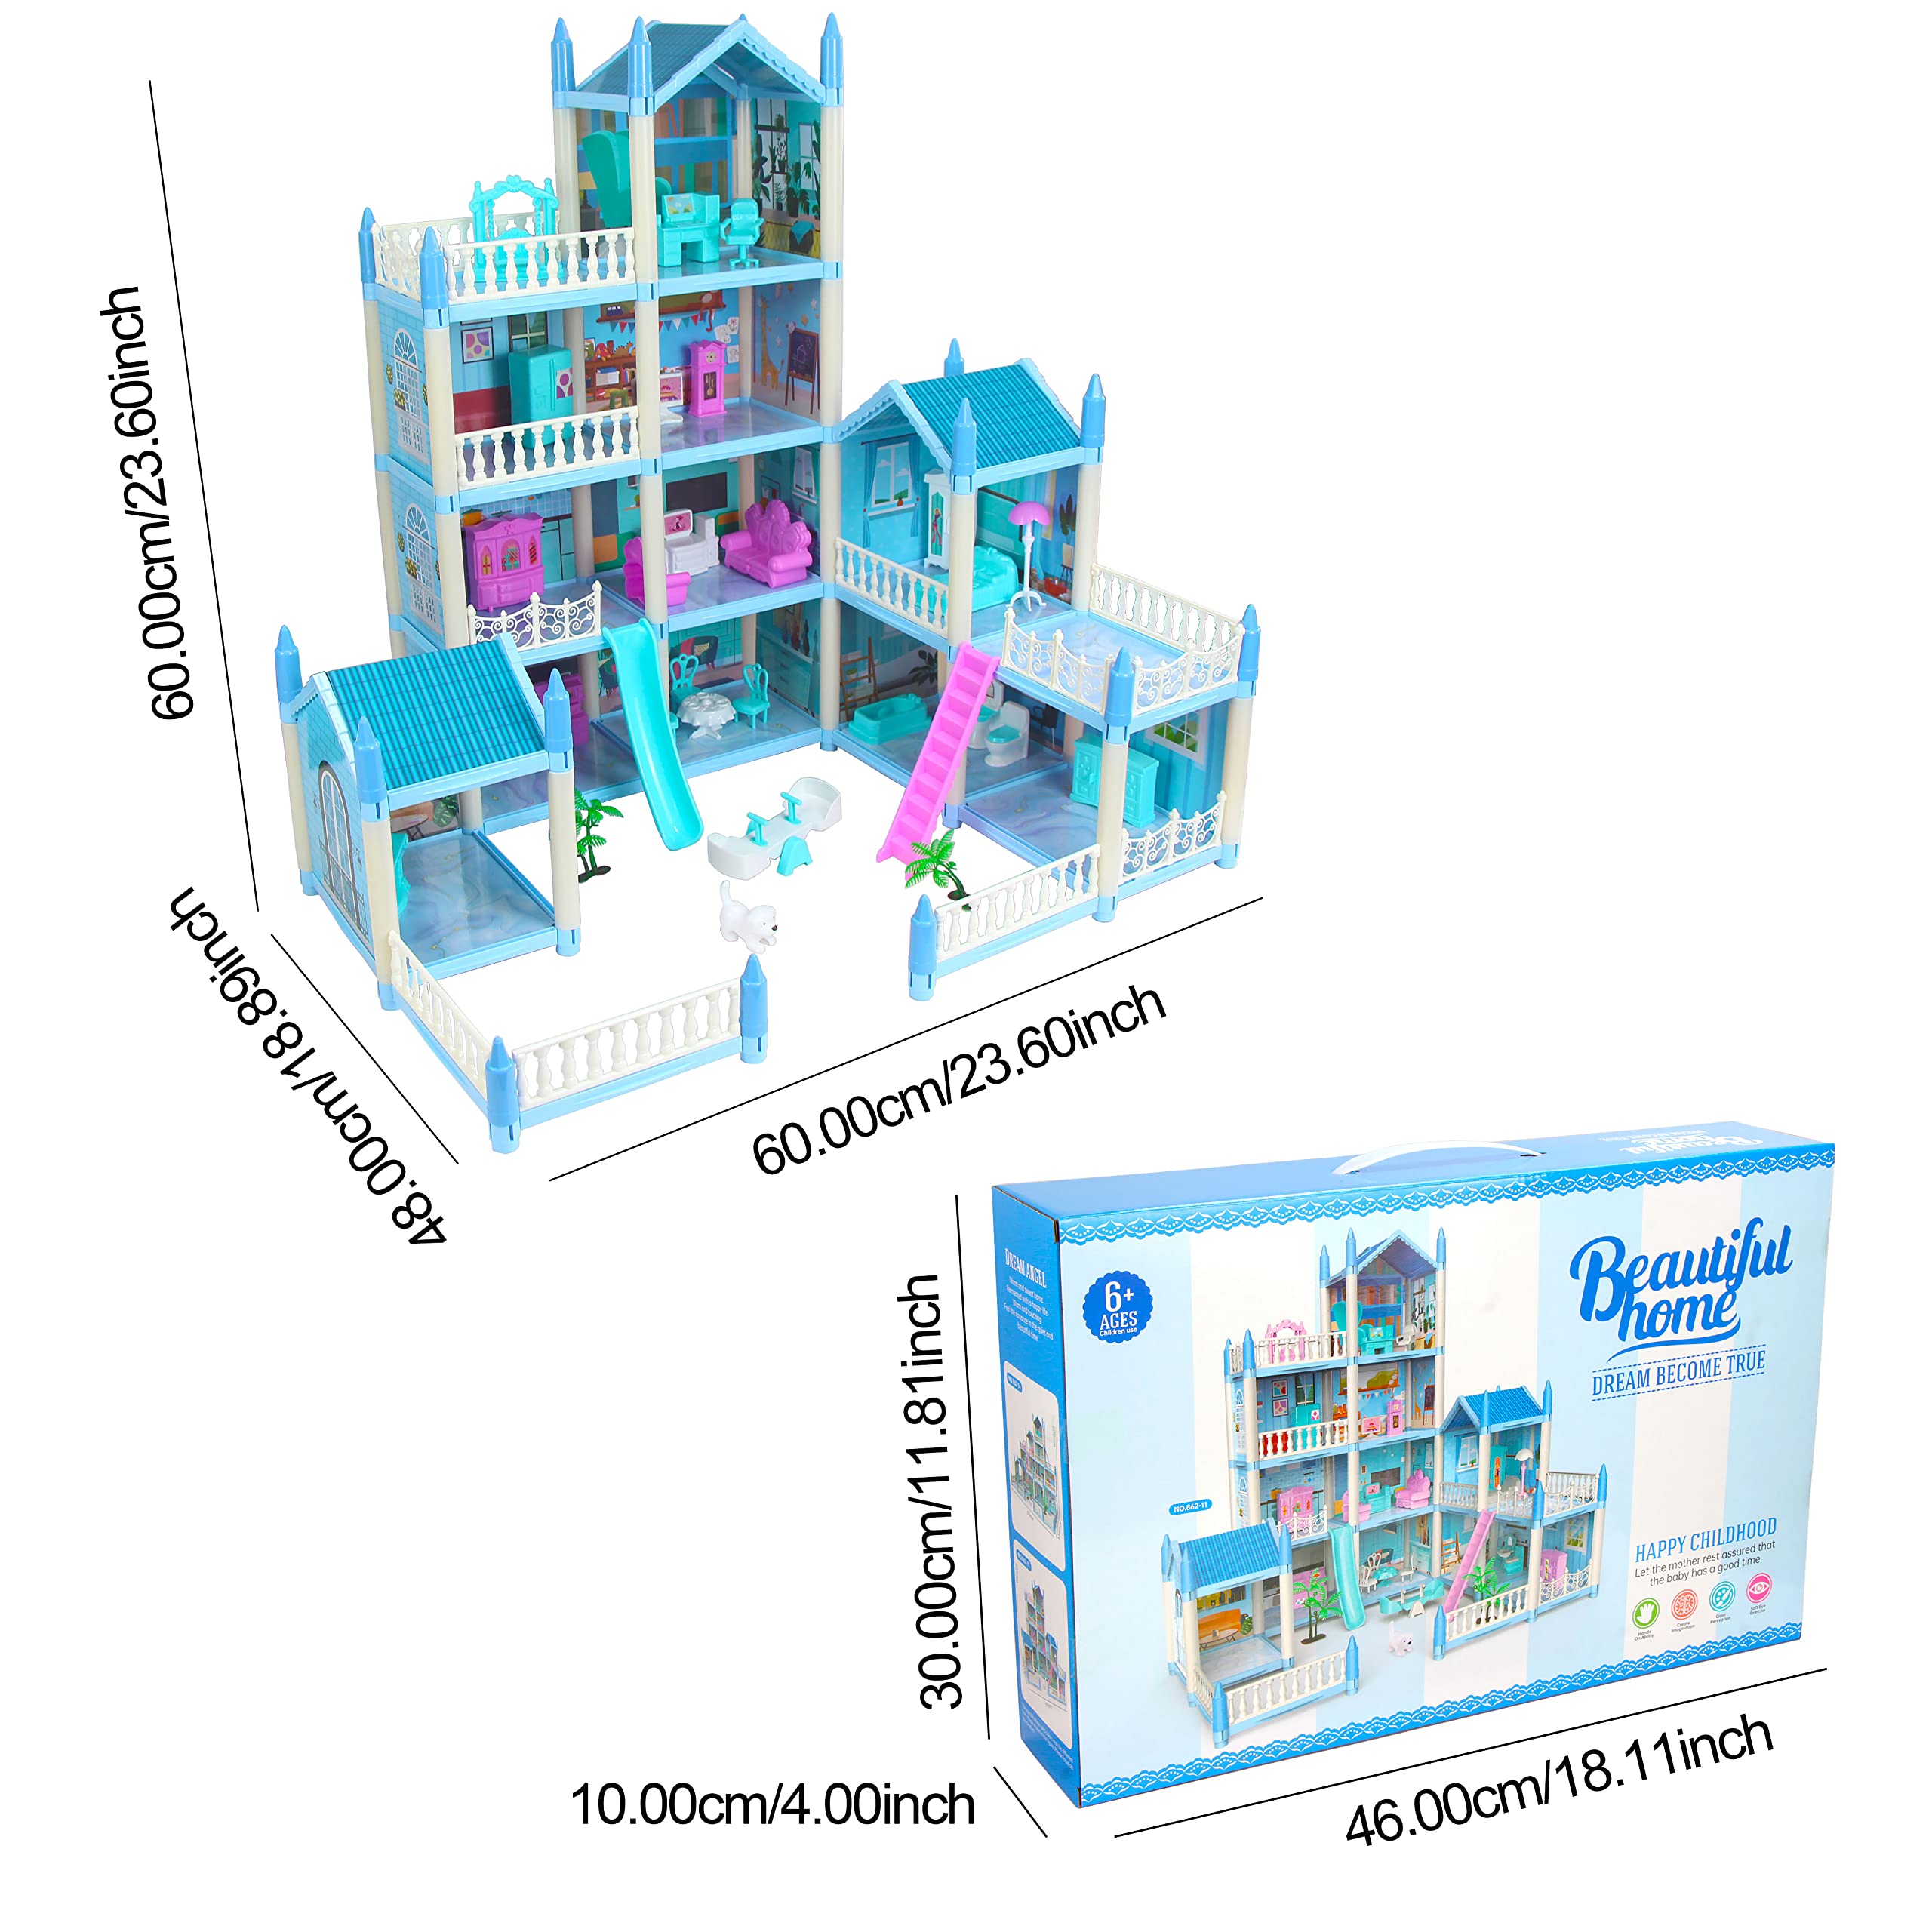 25 Inch Dollhouse Playset Girl Dreamhouse Kit, 4 Floors, 11 Rooms, Furniture and Accessories for Kids Girls Ages 3 4 5 6 7 8+